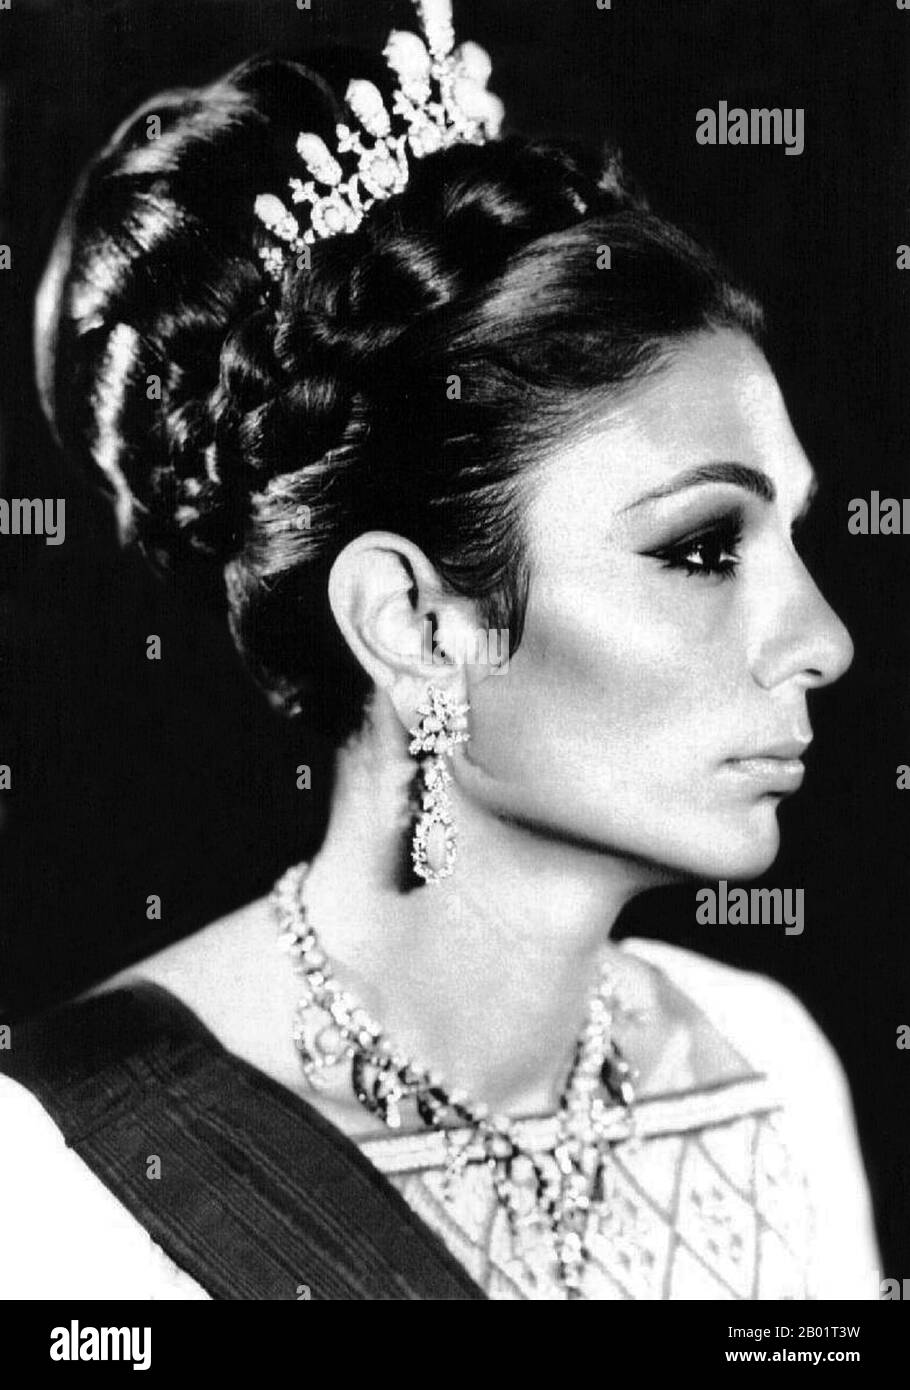 Iran/Persia: Official portrait of Empress Farah Pahlavi (1938-), wife and widow of Mohammad Reza Pahlavi, the Shah of Iran (1919-1979), c. 1970s.  Farah Pahlavi (born Farah Diba) is the former Queen and Empress of Iran. She is the widow of Mohammad Reza Pahlavi, the Shah of Iran, and only Empress of modern Iran. She was Queen Consort of Iran from 1959 until 1967 and Empress Consort from 1967 until exile in 1979.  Though the titles and distinctions of the Iranian Imperial Family were abolished within Iran by the Islamic government, she is still styled Empress or Shahbanou, out of courtesy. Stock Photo